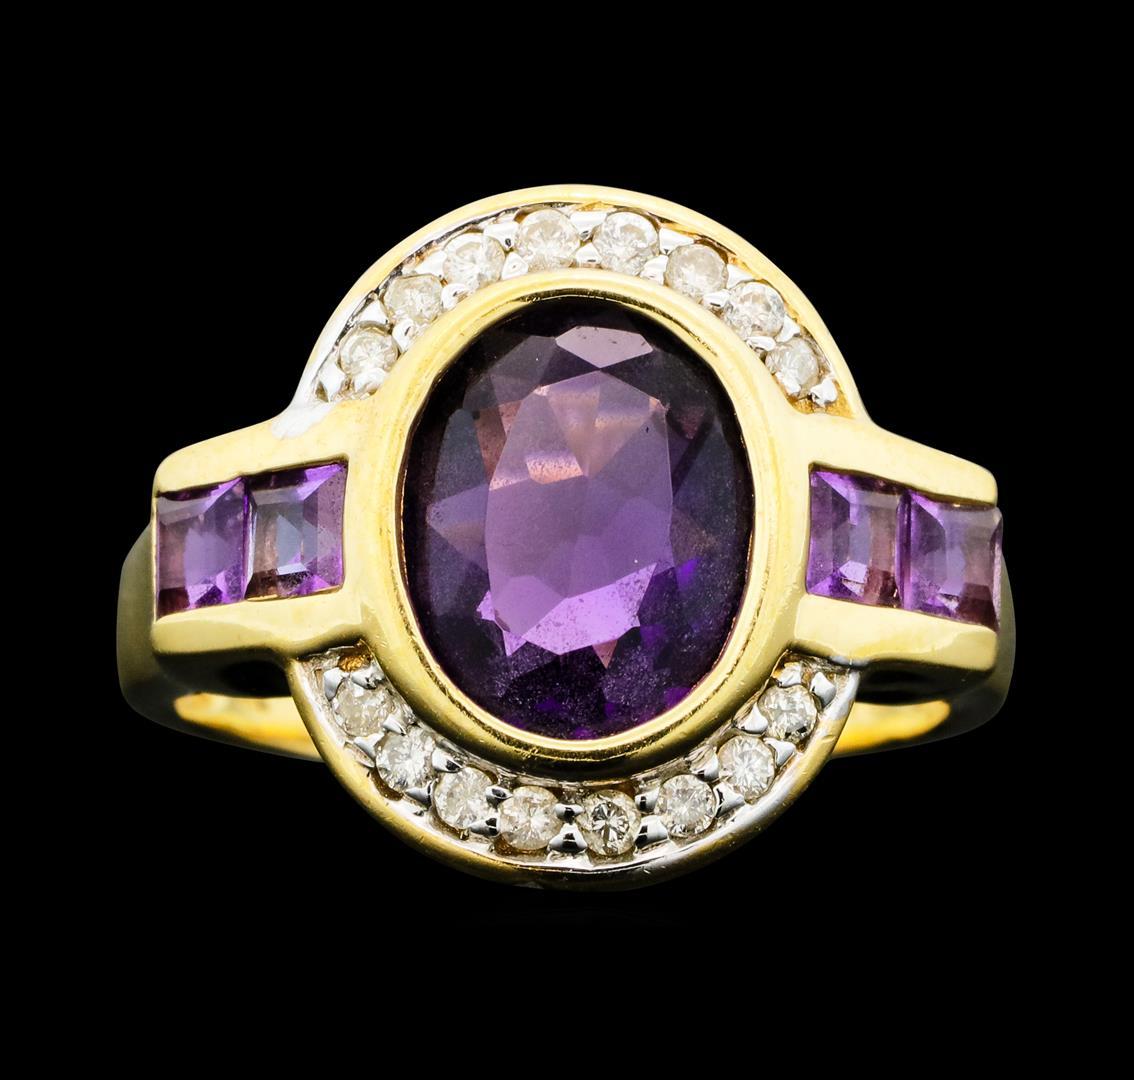 2.25 ctw Amethyst and Diamond Ring - 14KT Yellow Gold